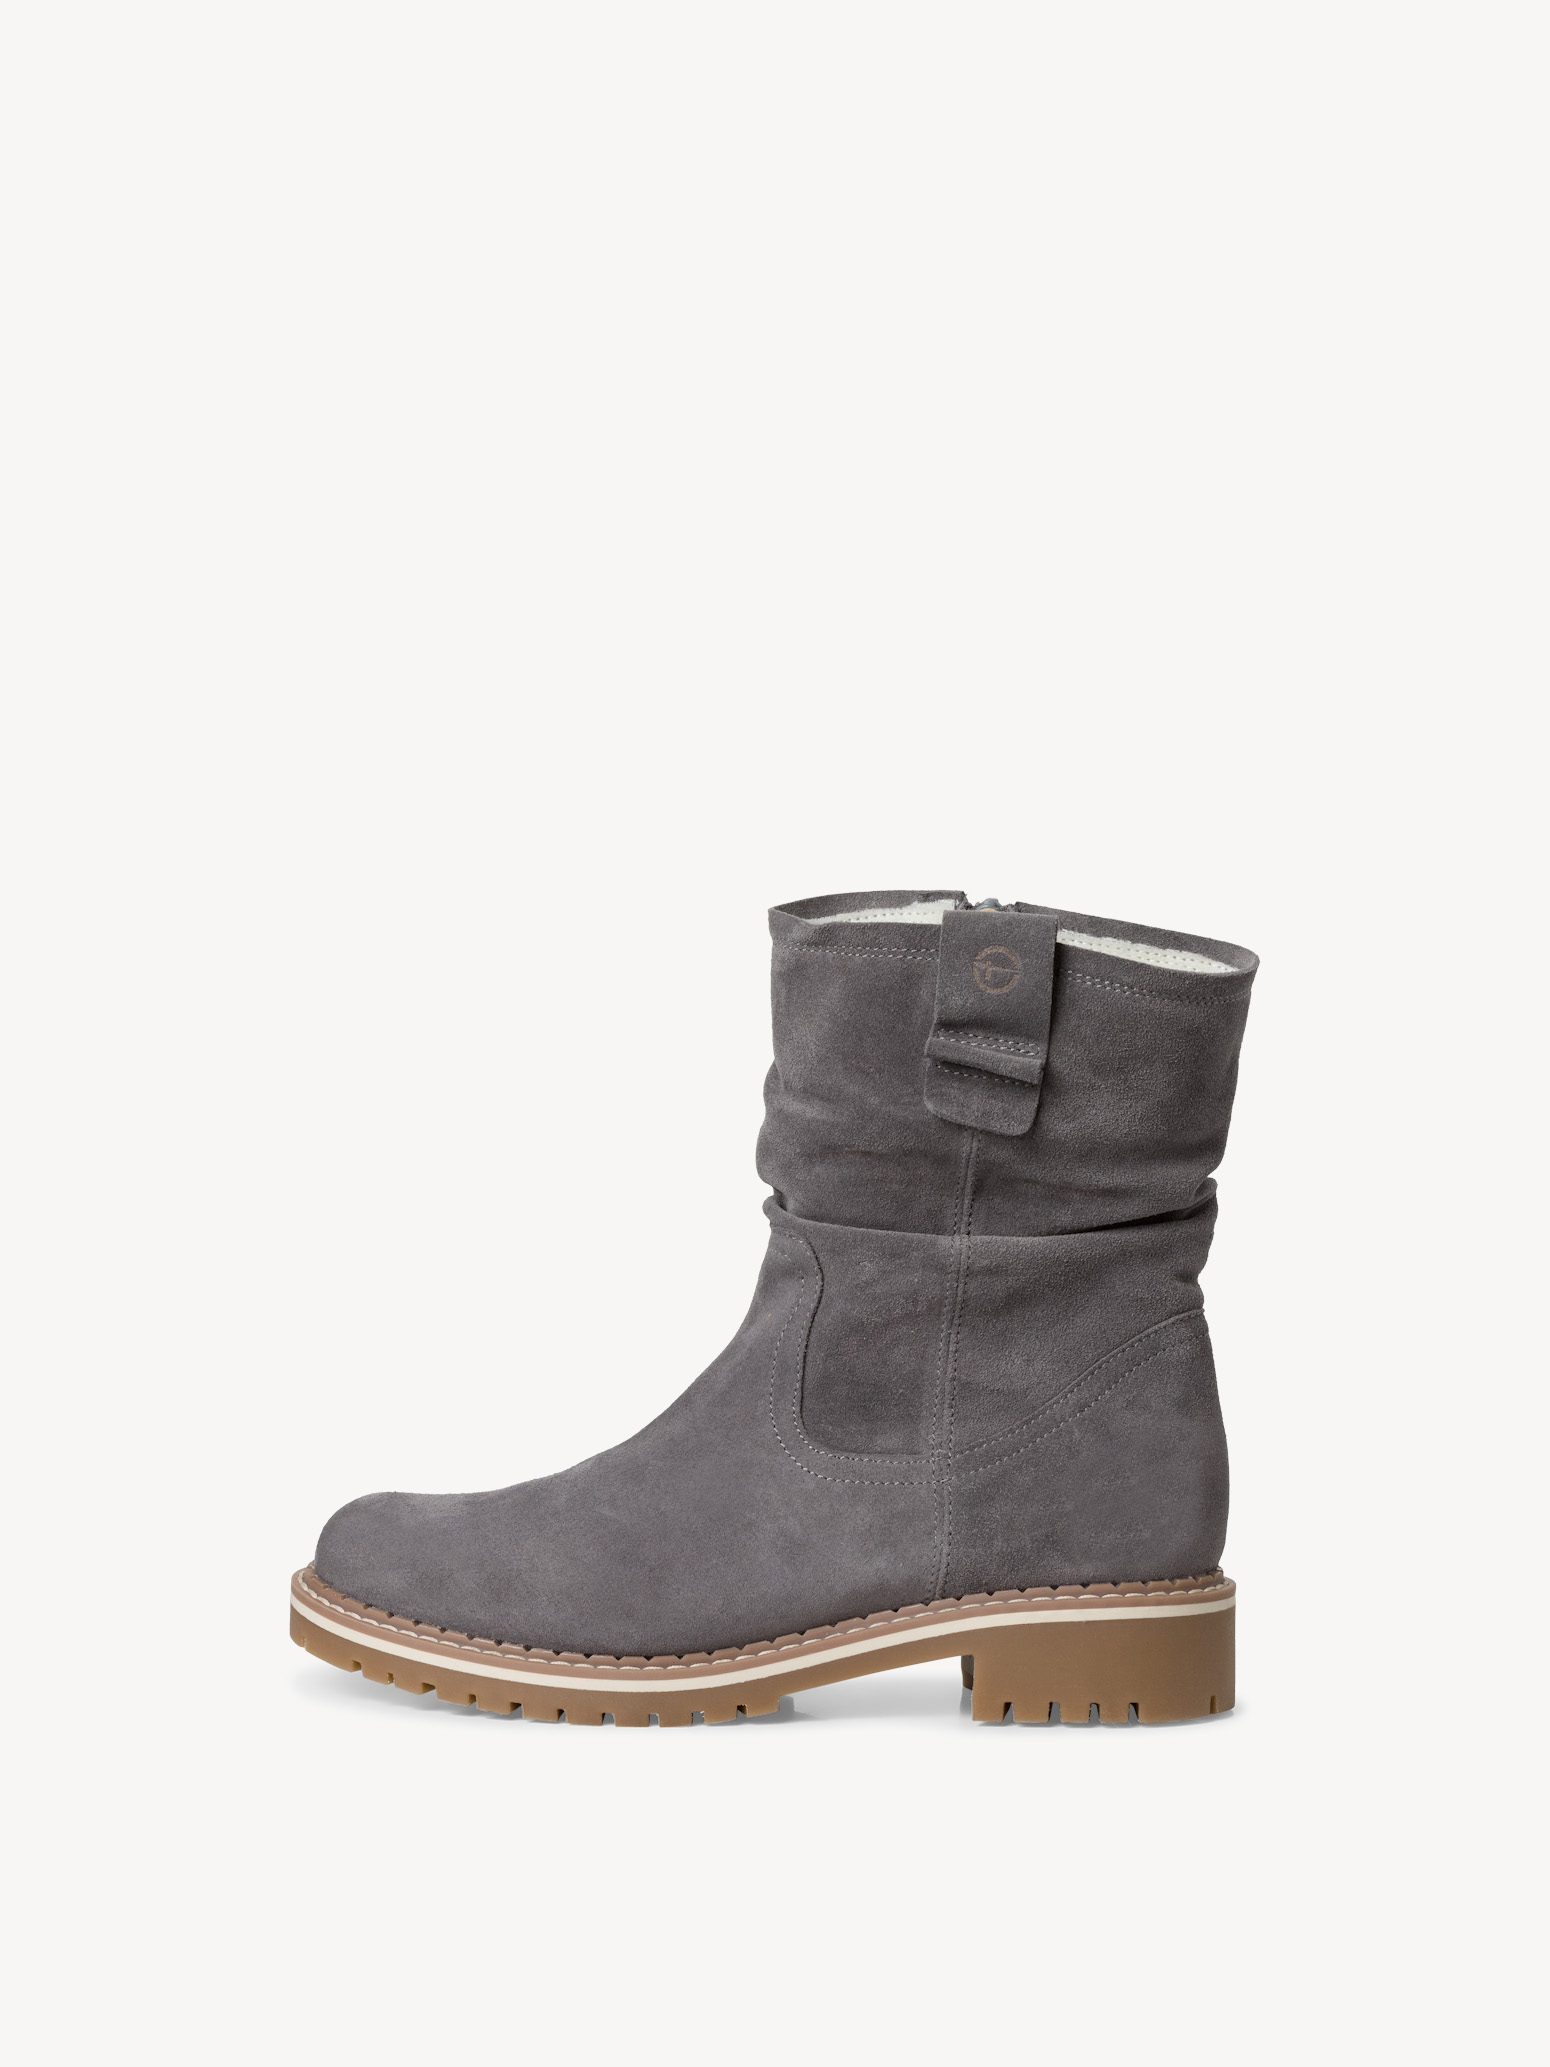 Leather Bootie - grey warm lining